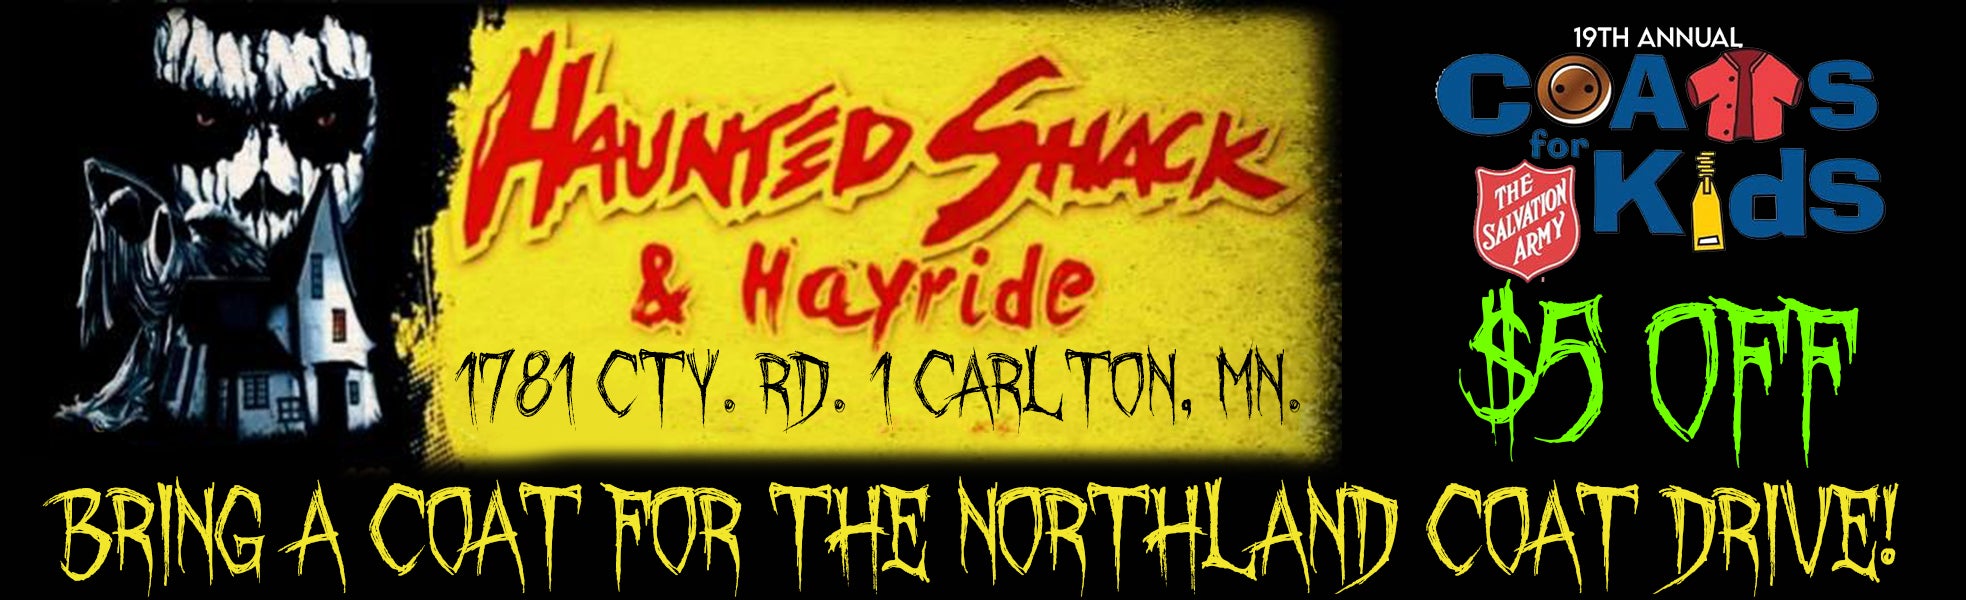 Haunted Shack Banner, bring a coat for the northland coat drive!